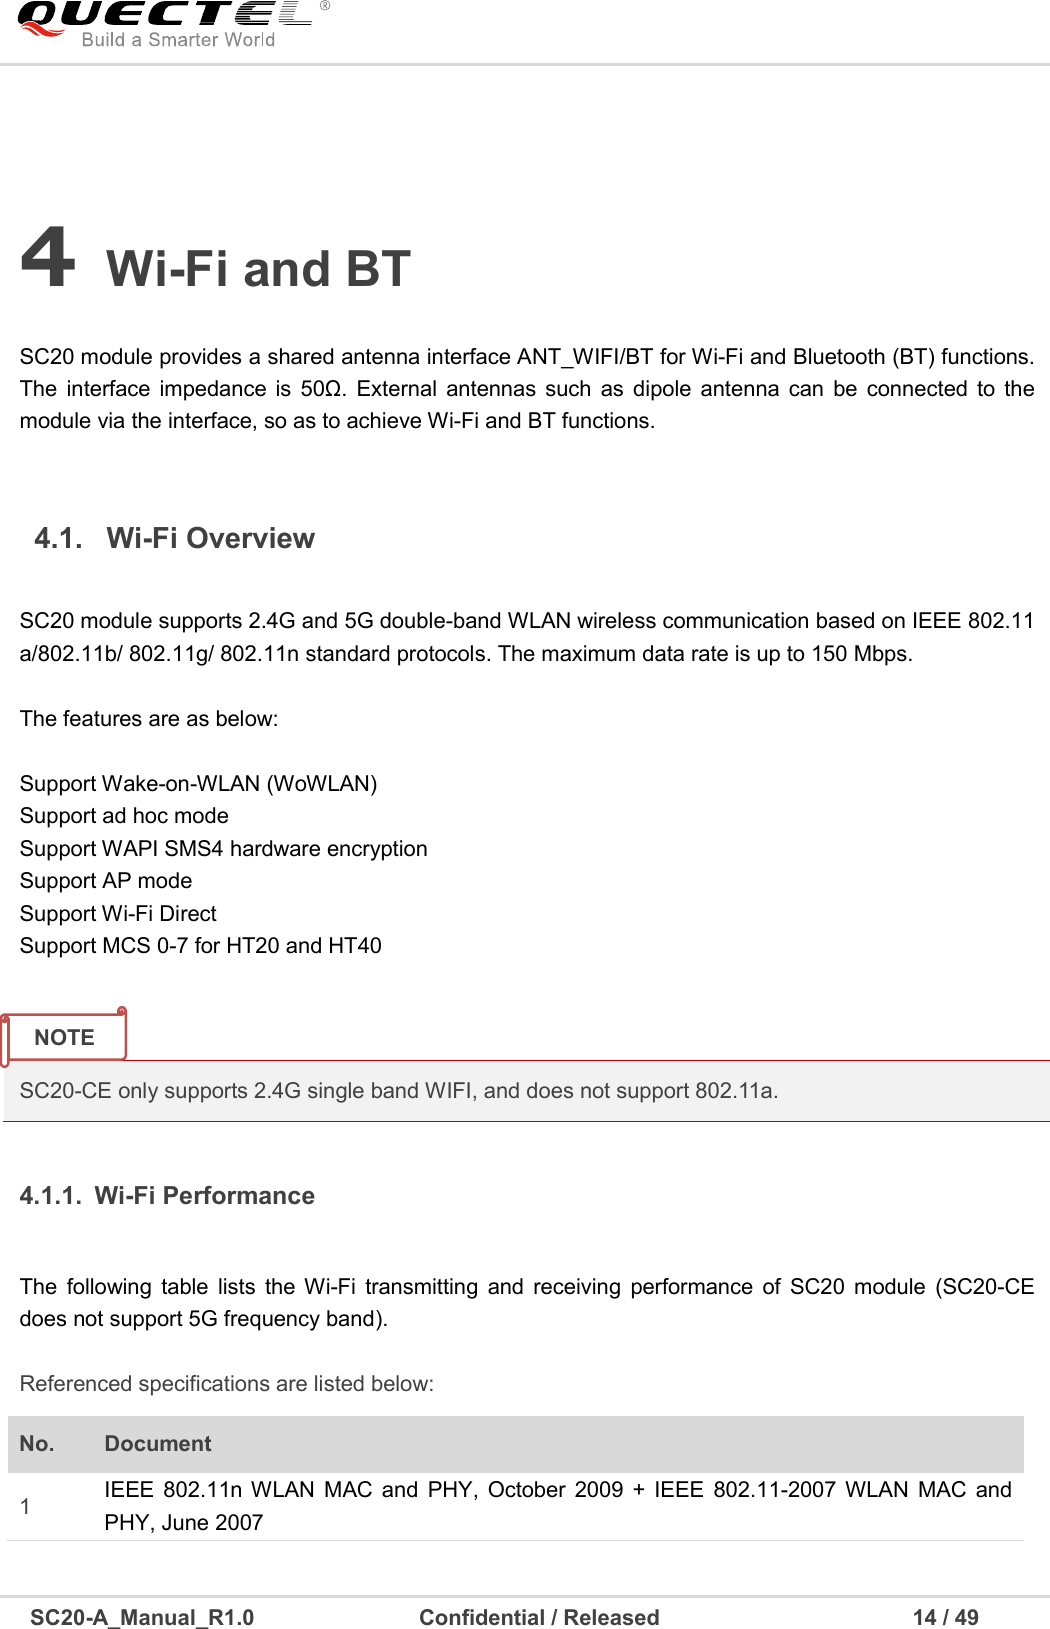     SC20-A_Manual_R1.0                              Confidential / Released                                              14 / 49    4 Wi-Fi and BT 4.1.  Wi-Fi Overview 4.1.1.  Wi-Fi Performance   Referenced specifications are listed below: No.  Document   1  IEEE  802.11n WLAN  MAC  and  PHY,  October  2009 +  IEEE  802.11-2007 WLAN  MAC  and PHY, June 2007  SC20 module provides a shared antenna interface ANT_WIFI/BT for Wi-Fi and Bluetooth (BT) functions. The  interface  impedance is  50Ω. External  antennas  such  as  dipole antenna  can  be  connected  to the module via the interface, so as to achieve Wi-Fi and BT functions.     SC20 module supports 2.4G and 5G double-band WLAN wireless communication based on IEEE 802.11 a/802.11b/ 802.11g/ 802.11n standard protocols. The maximum data rate is up to 150 Mbps.    The features are as below:  Support Wake-on-WLAN (WoWLAN) Support ad hoc mode Support WAPI SMS4 hardware encryption Support AP mode Support Wi-Fi Direct Support MCS 0-7 for HT20 and HT40   SC20-CE only supports 2.4G single band WIFI, and does not support 802.11a.   The  following  table  lists  the  Wi-Fi  transmitting  and  receiving  performance  of  SC20  module  (SC20-CE does not support 5G frequency band).    NOTE  